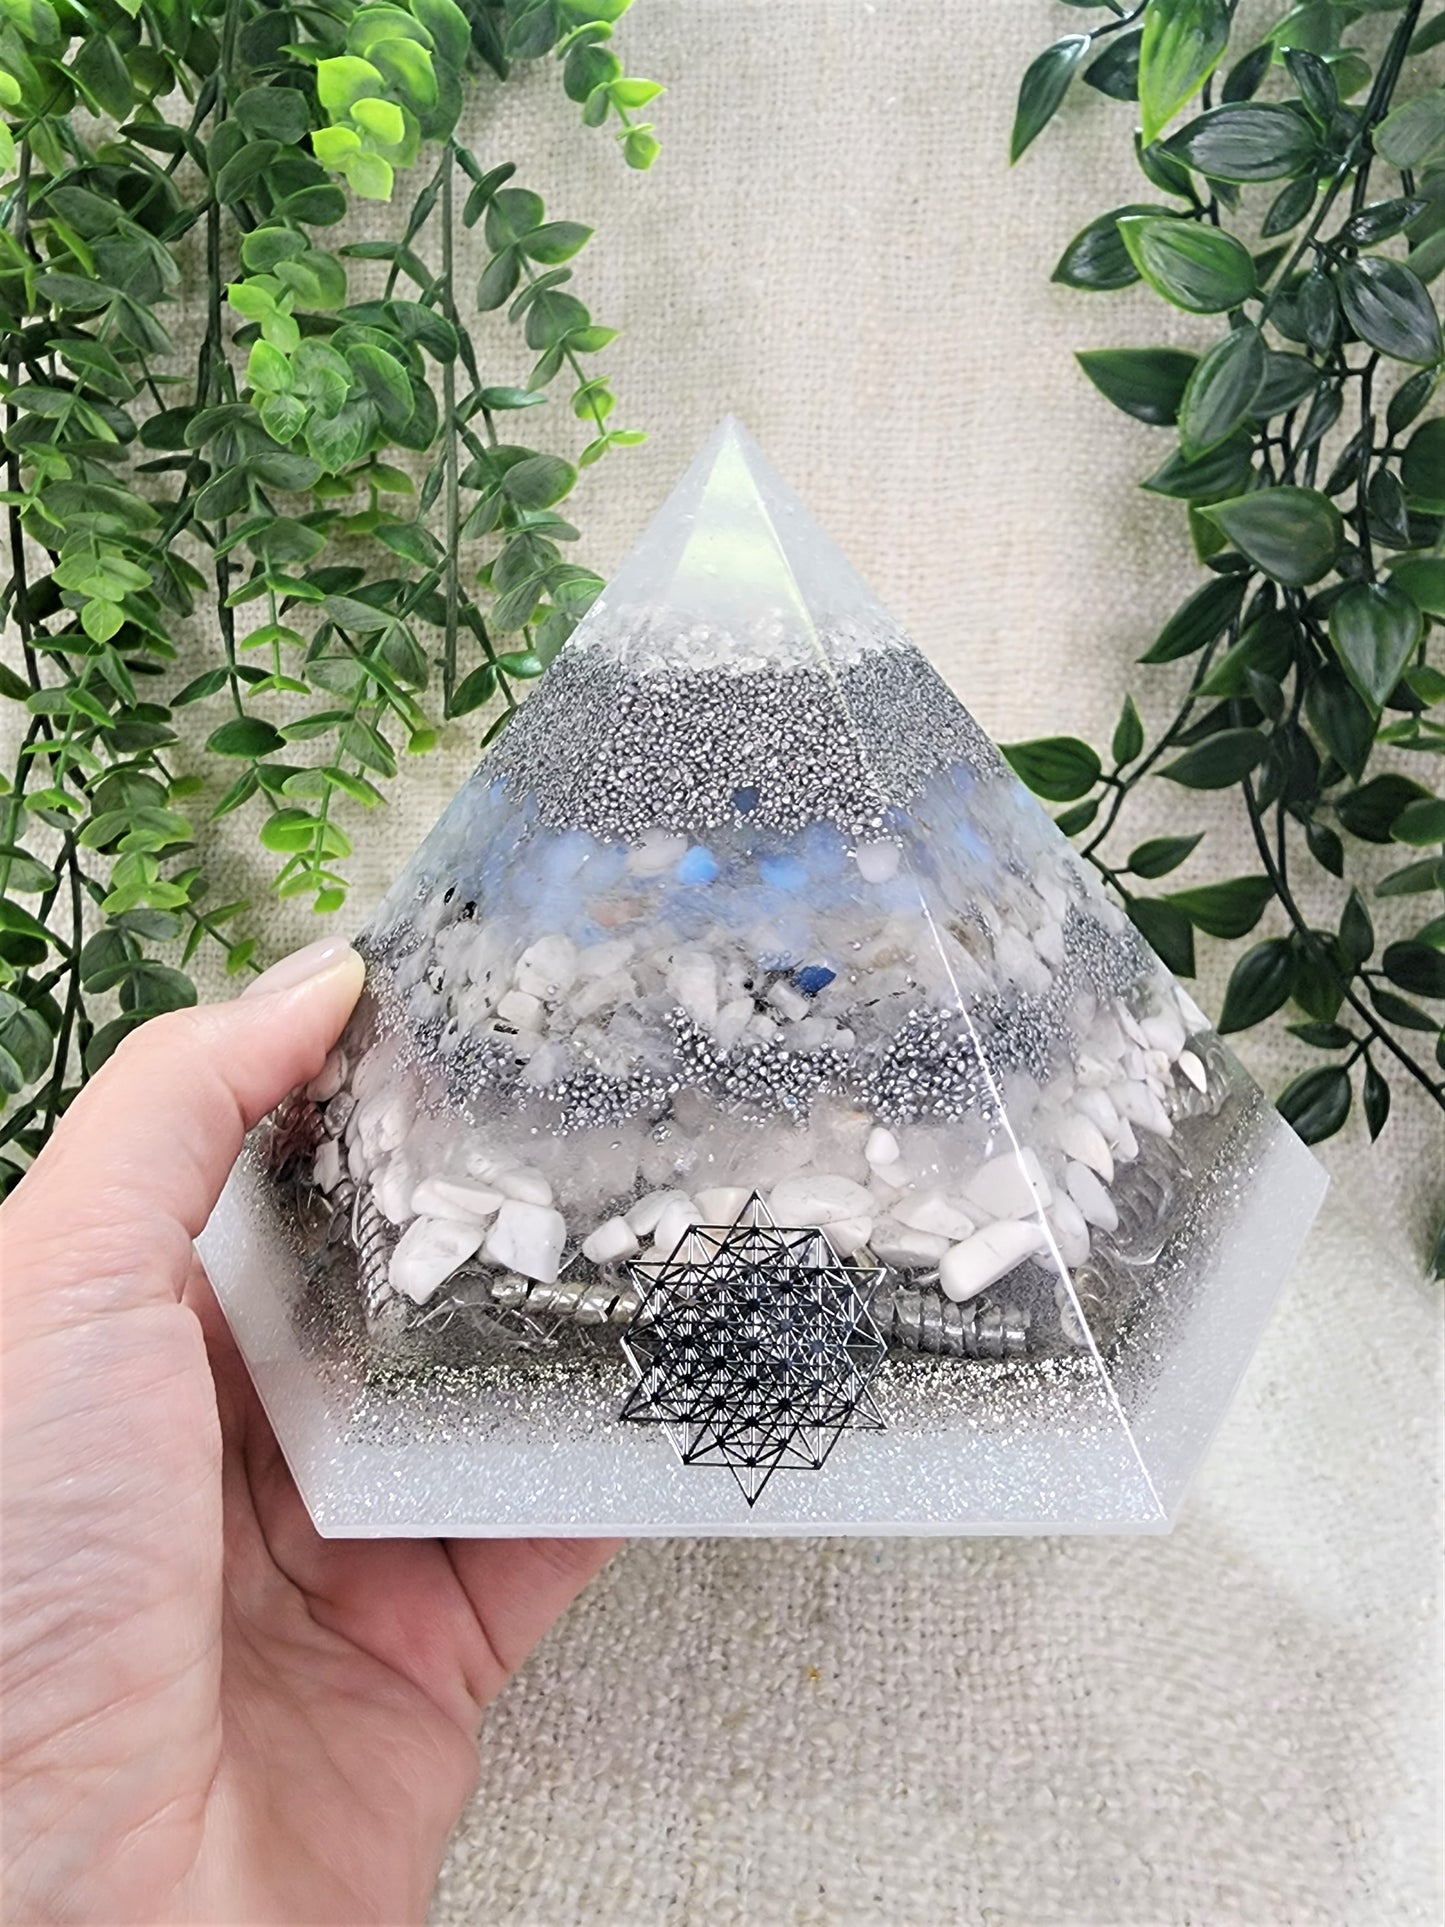 WINTER SOLSTICE - Special Edition Hexagonal Pyramid! - EMF Protector - Opalite, Moonstone, White Quartz, Howlite Crystals, with Aluminum Metal, White Brass and Real Silver Flakes